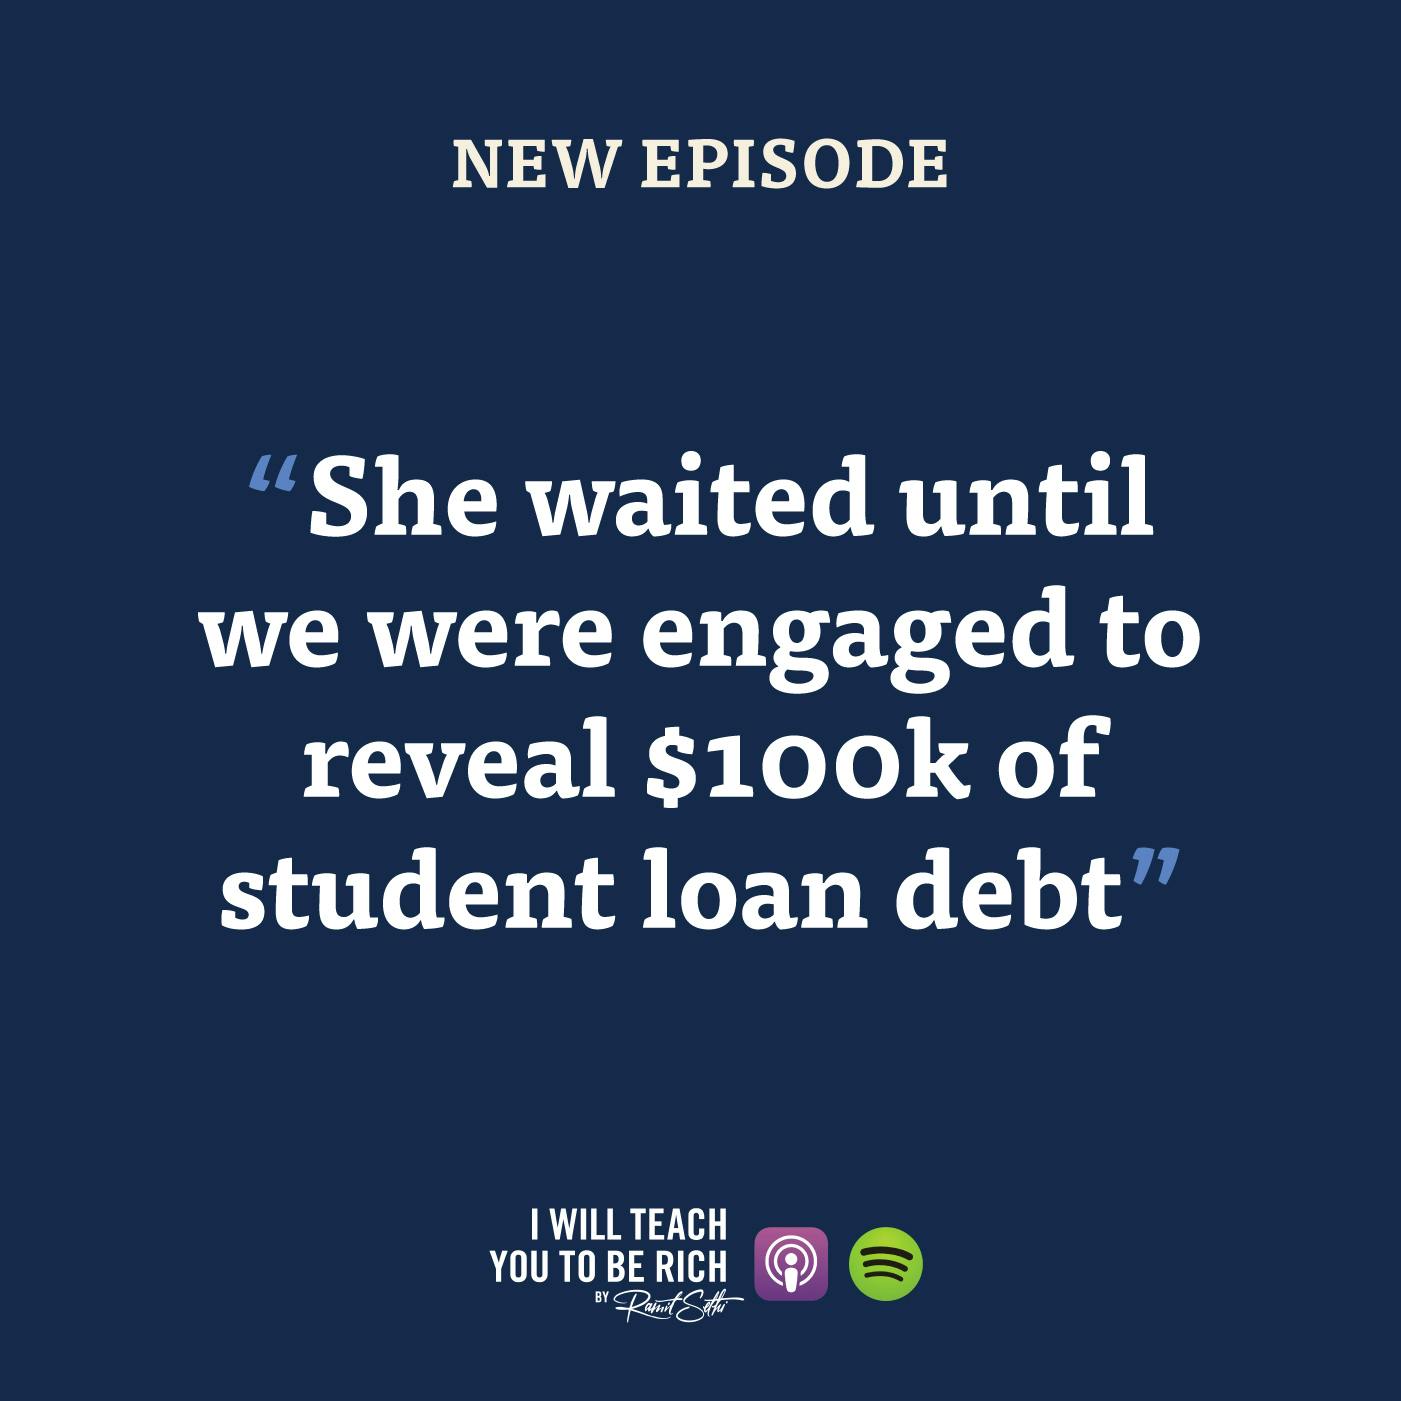 39. “She waited until we were engaged to reveal $100k of student loan debt”